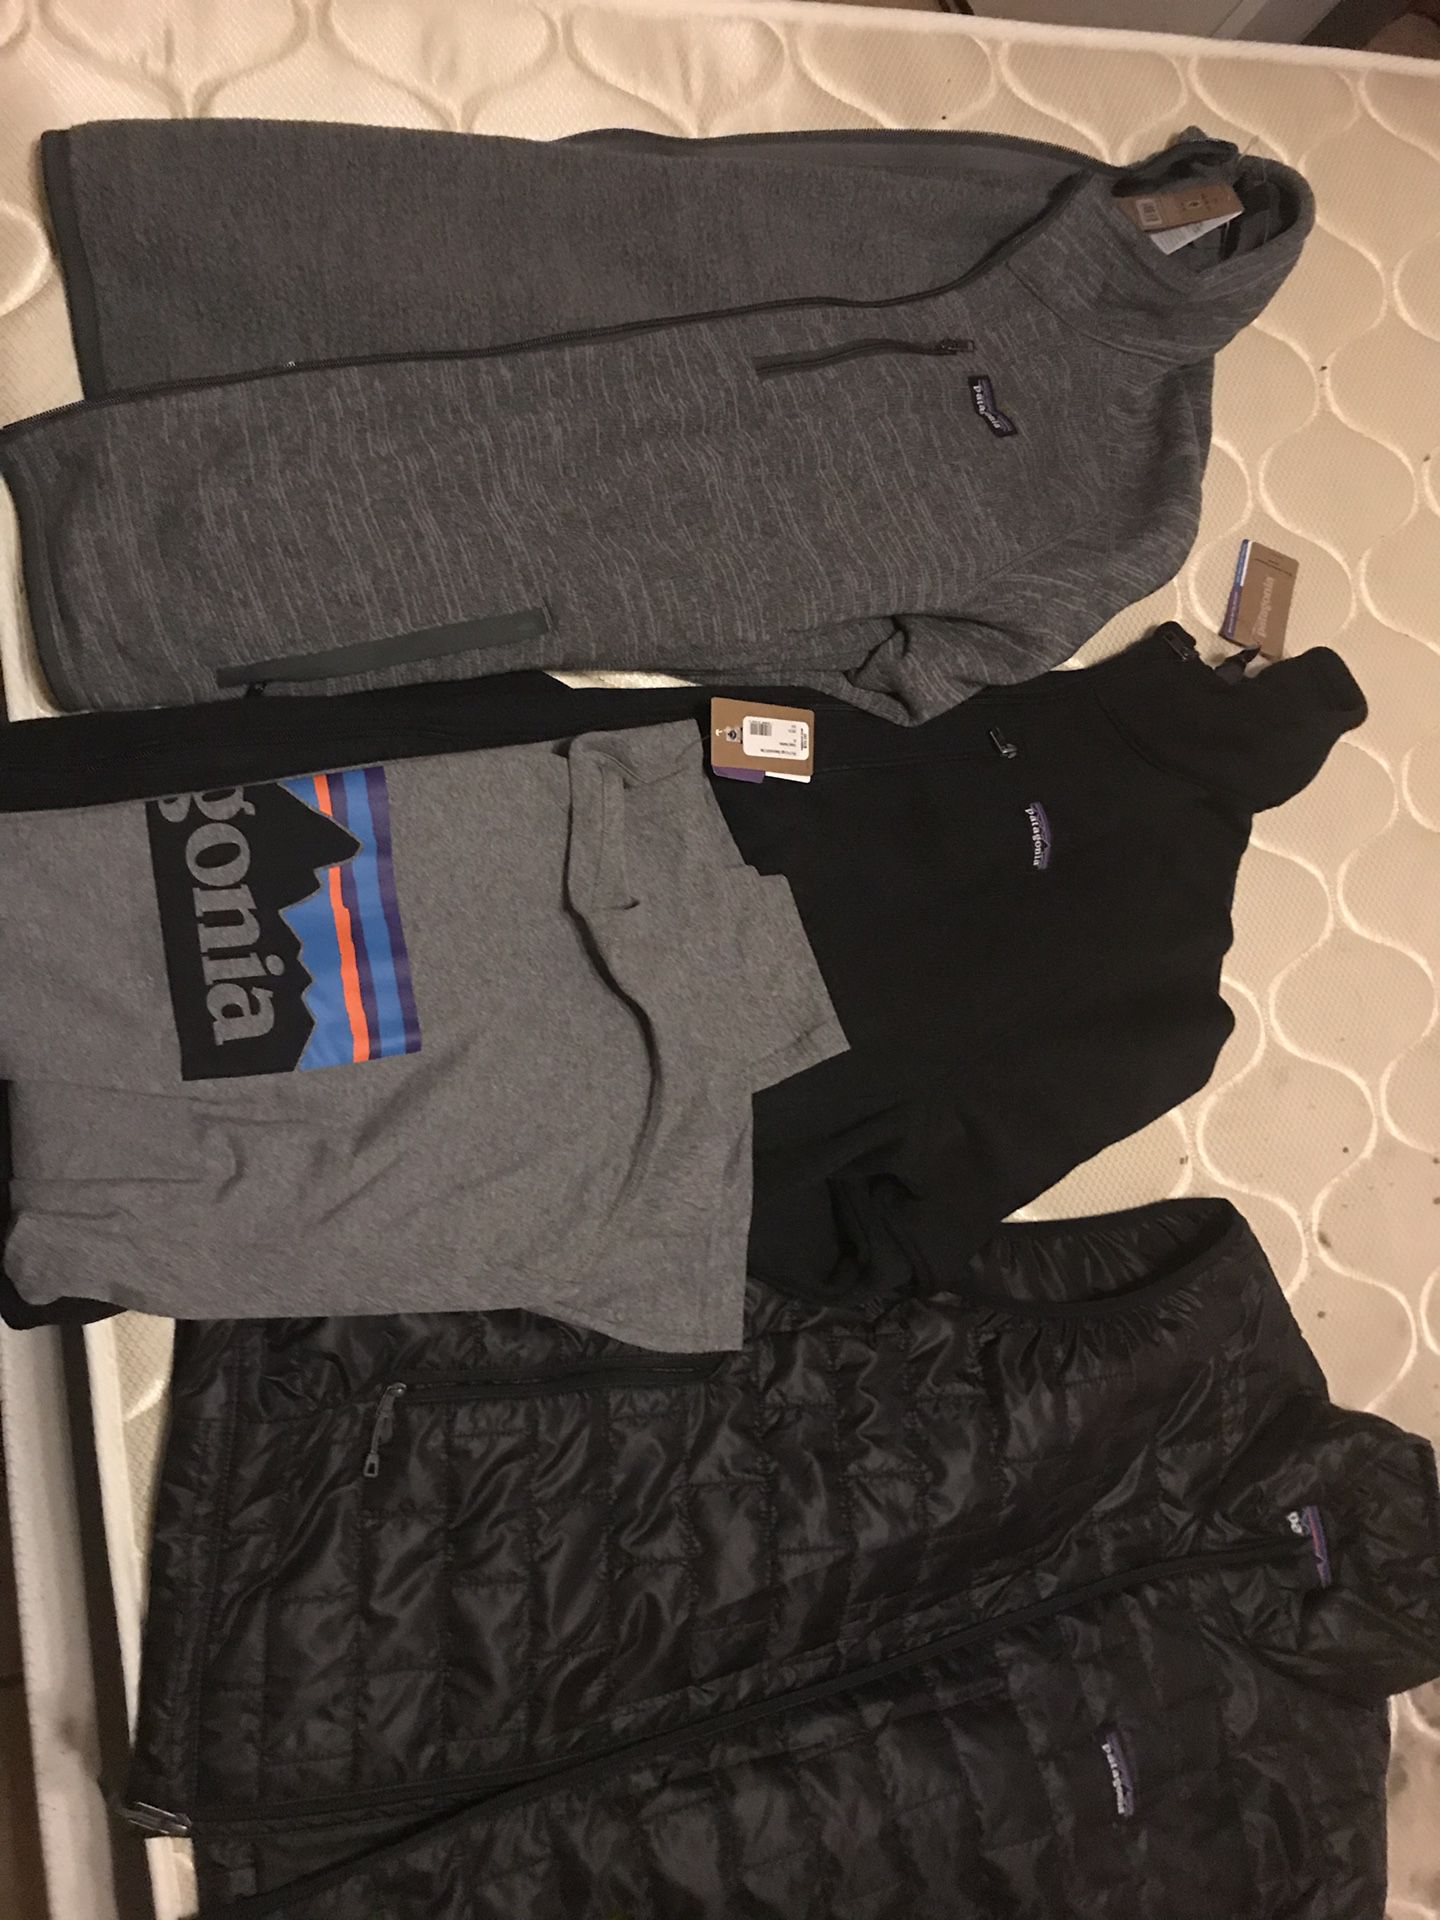 Brand new men’s Patagonia sweater vest collection set with tags MSRP 600$